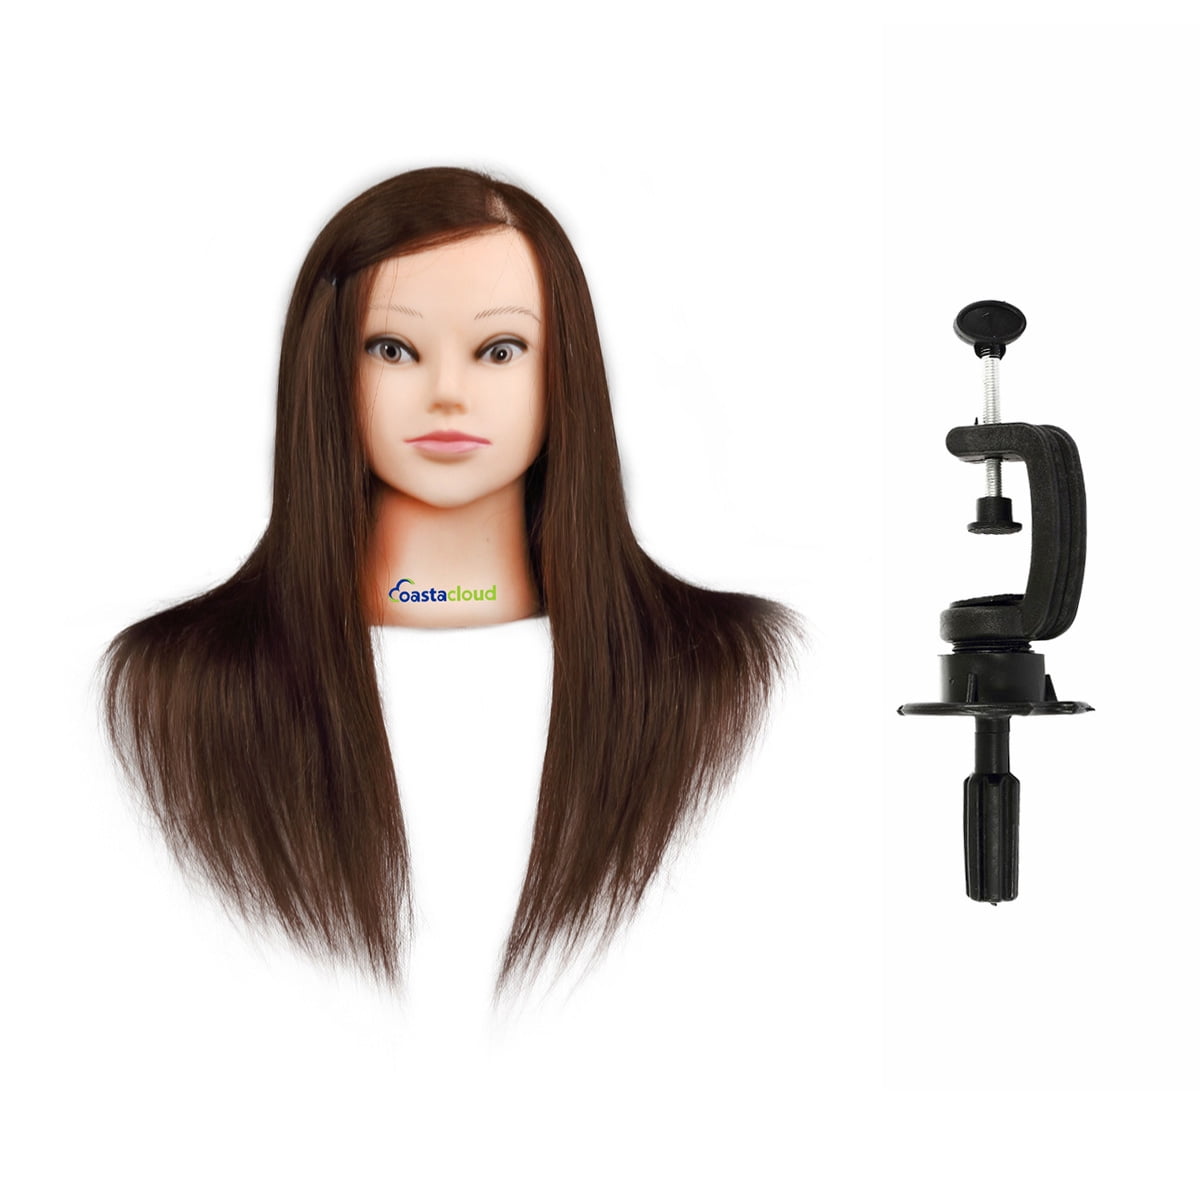 Doll Manikin 98% 22inch Human Hair Hairdressing Mannequin Head + Free Clamp  Holder Salon Cosmetology Beauty Training Hairdresser Hair styling Practice  CoastaCloud 